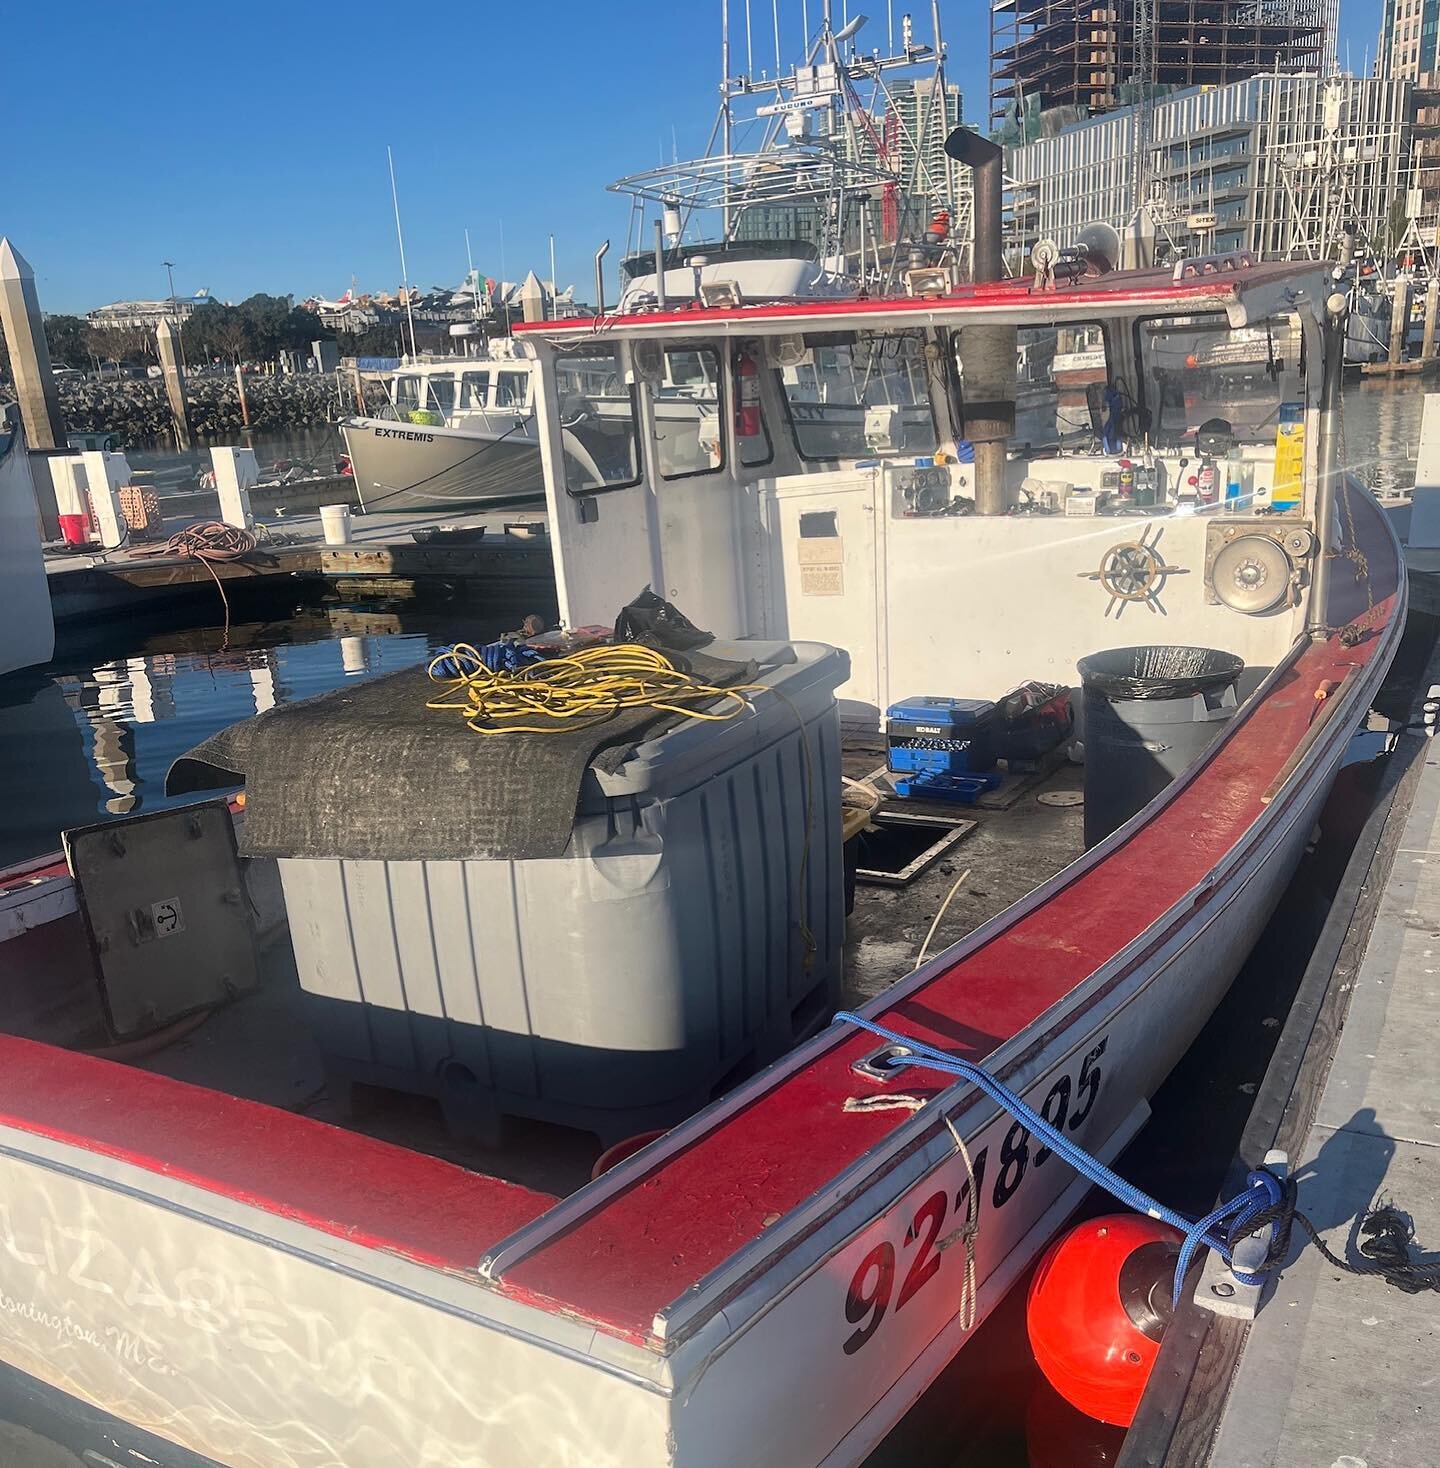 She&rsquo;s happily tucked into her spot and now the work begins! New house, cabin, electronics and paint job are in the works! We&rsquo;re really looking forward to the season! #jimbeal #commercialfishing